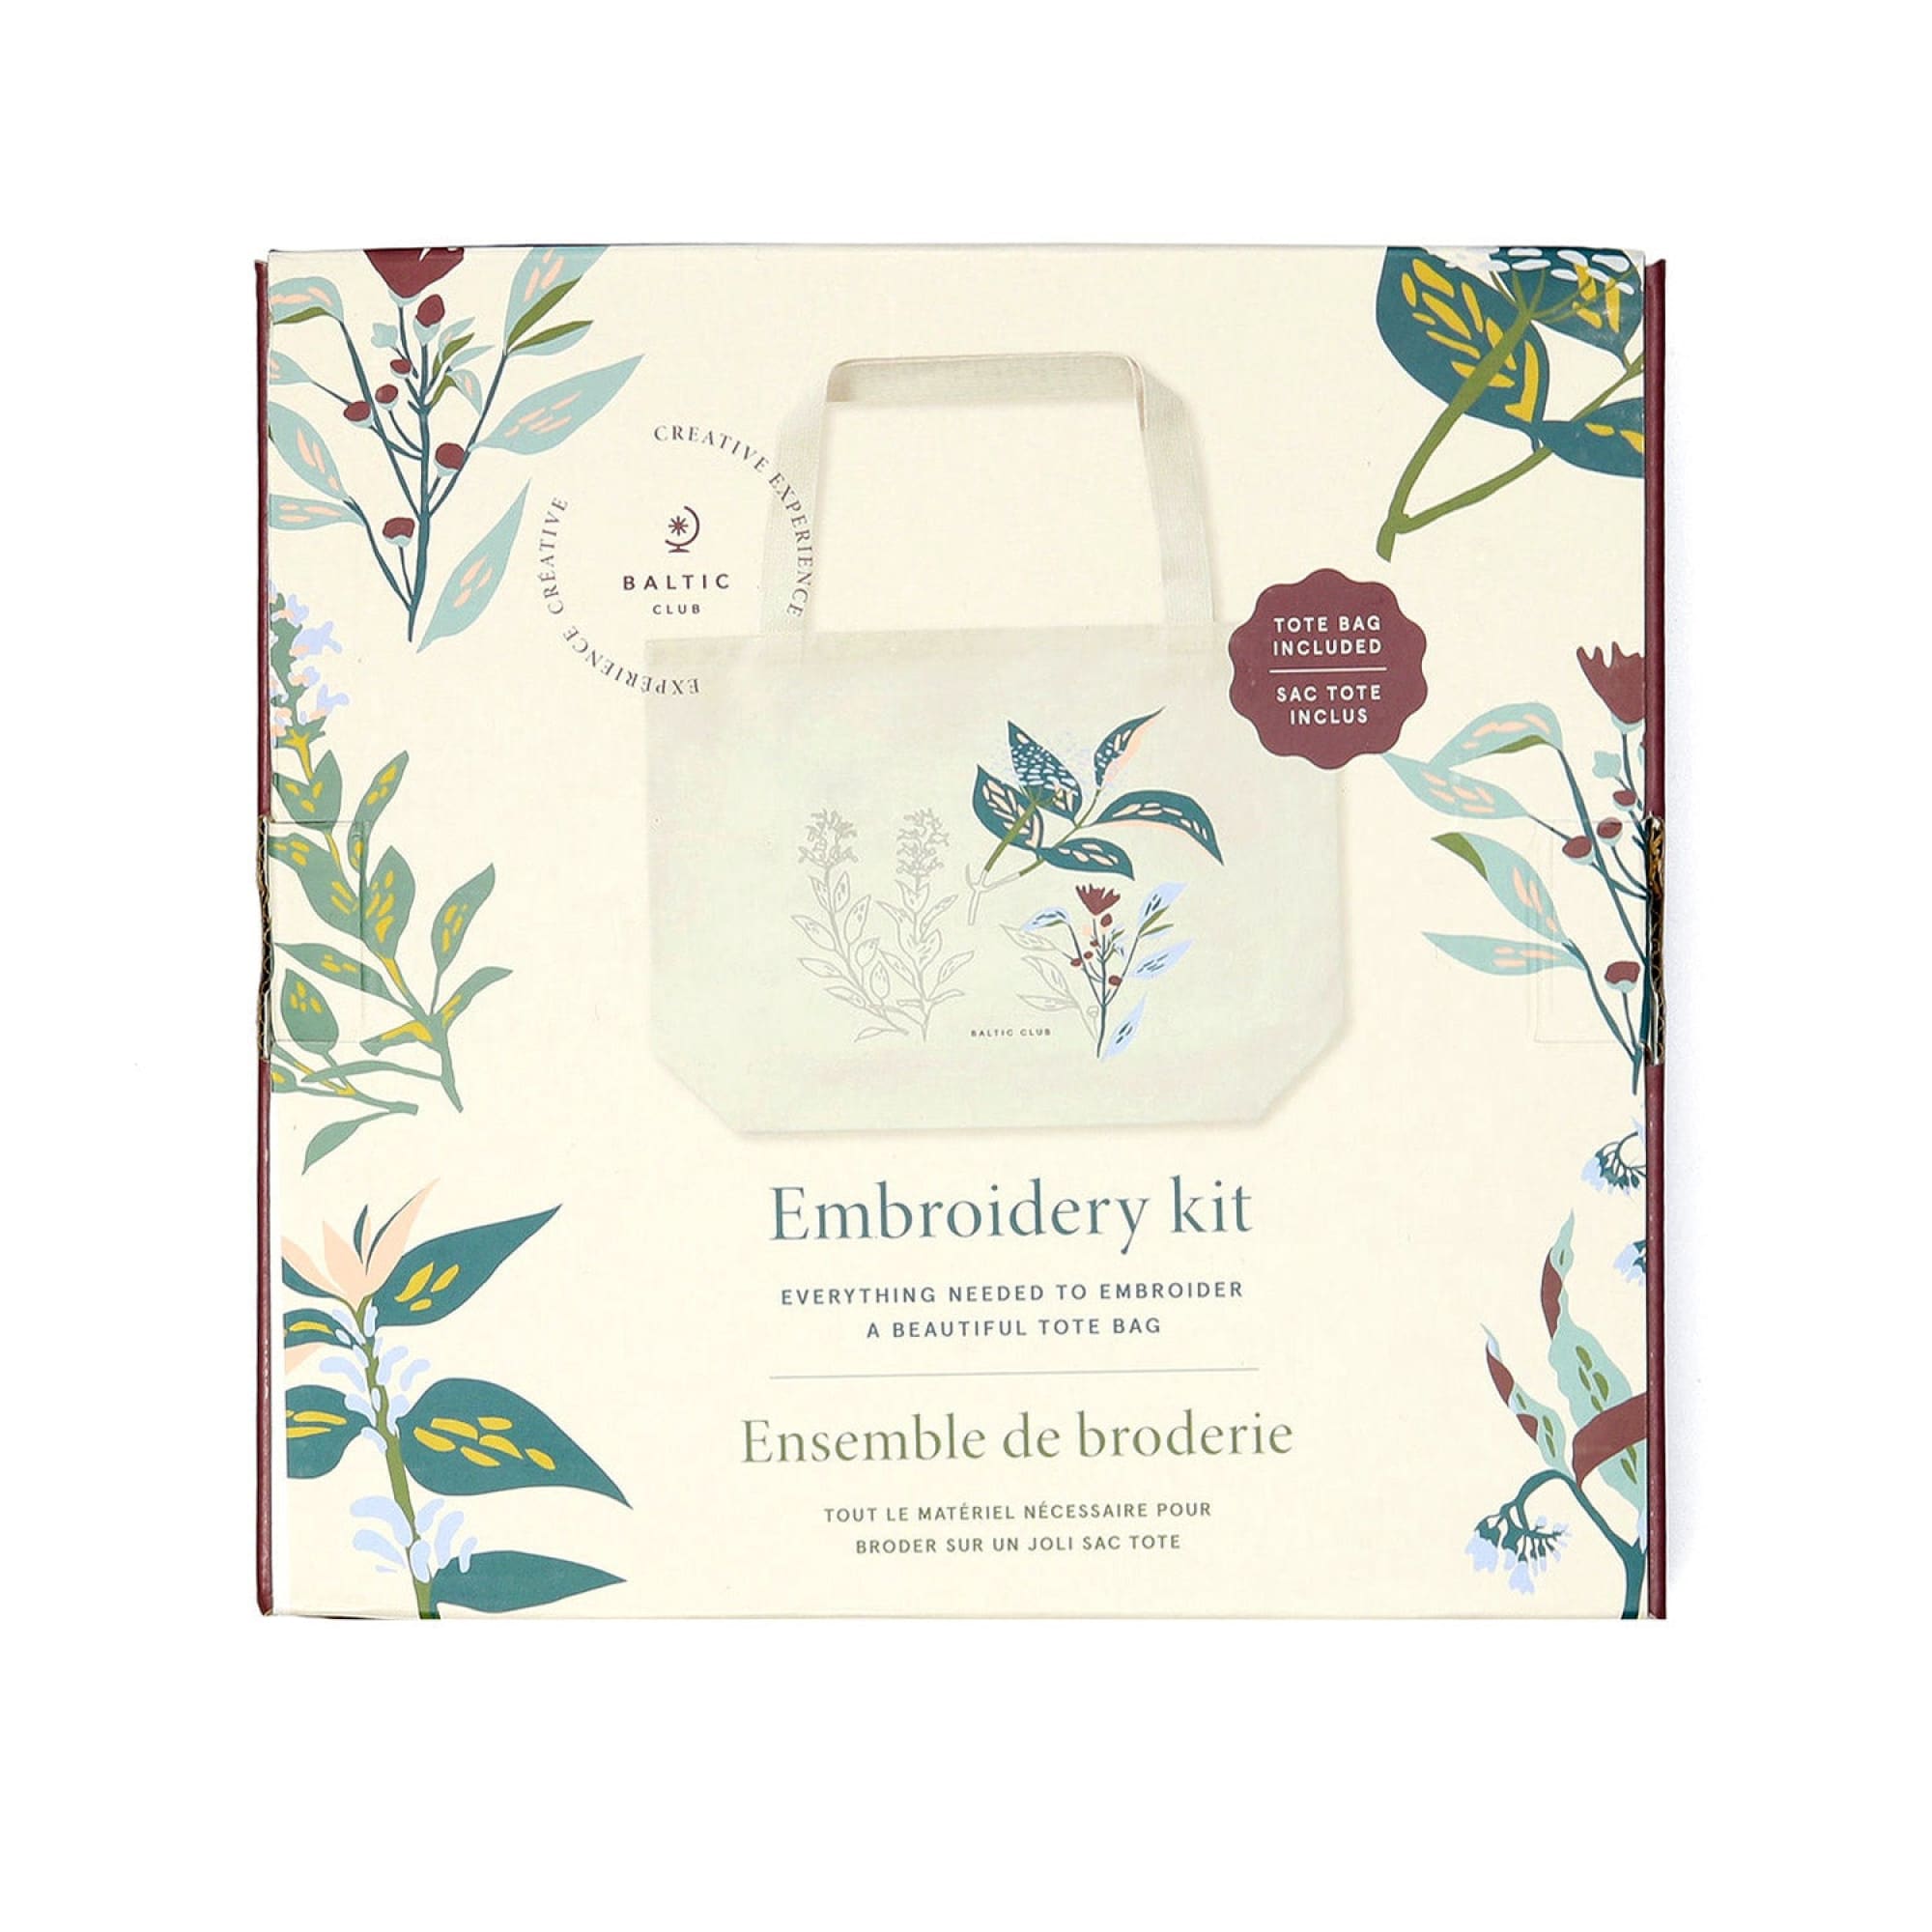 Front cover of the box of the Tote bag Embroidery Kit by The Baltic Club